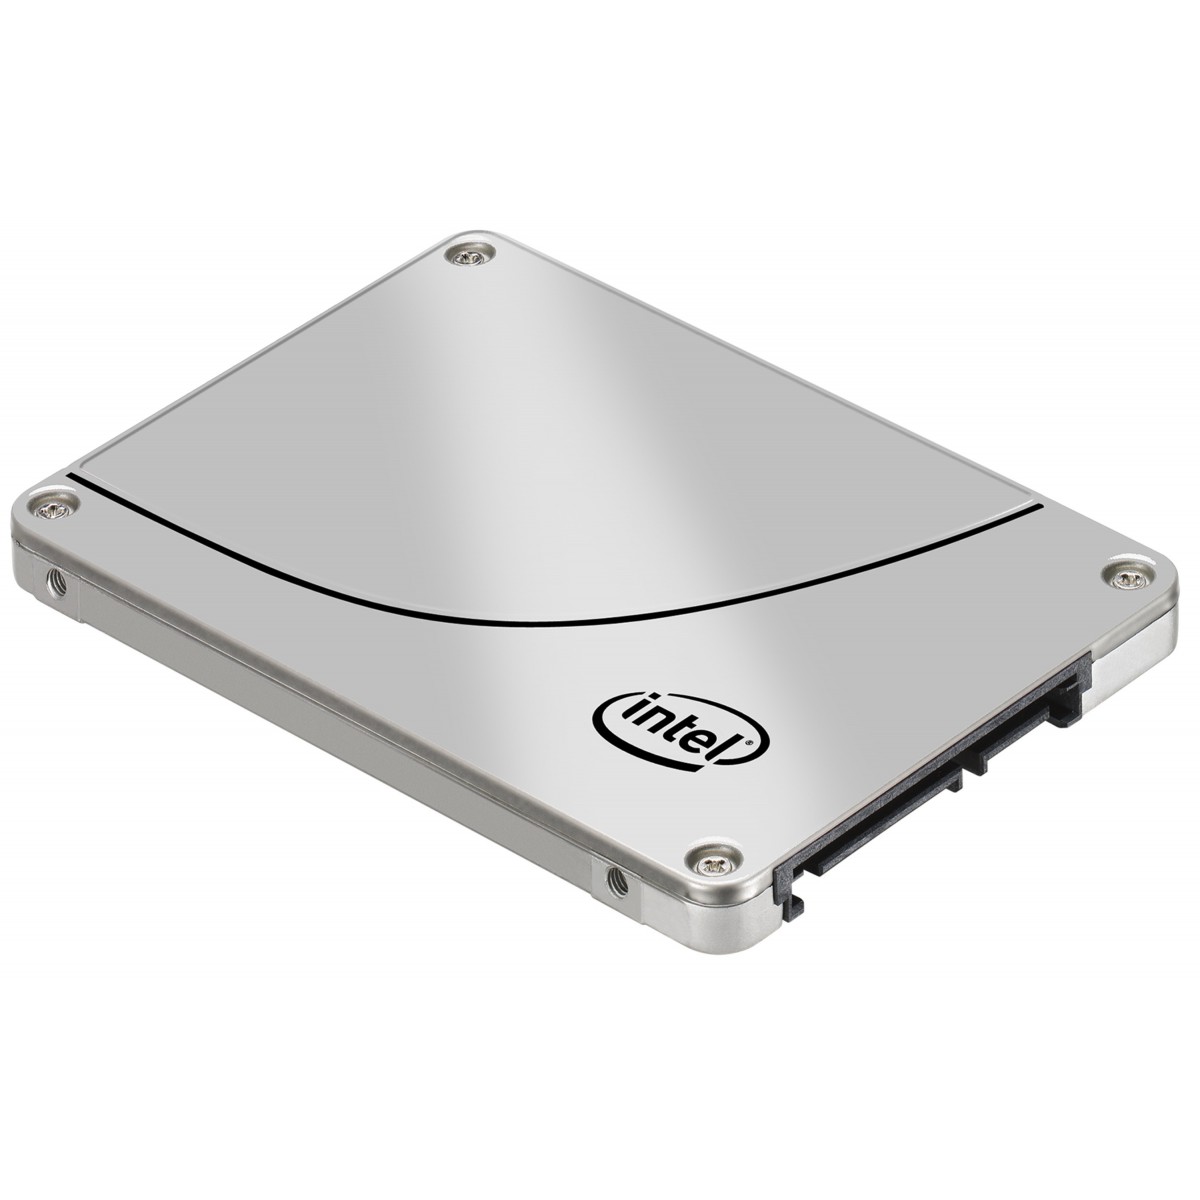 Intel Solid-State Drive DC S3500 Series 2.5 SATA 600 GB - Solid State Disk - Internal